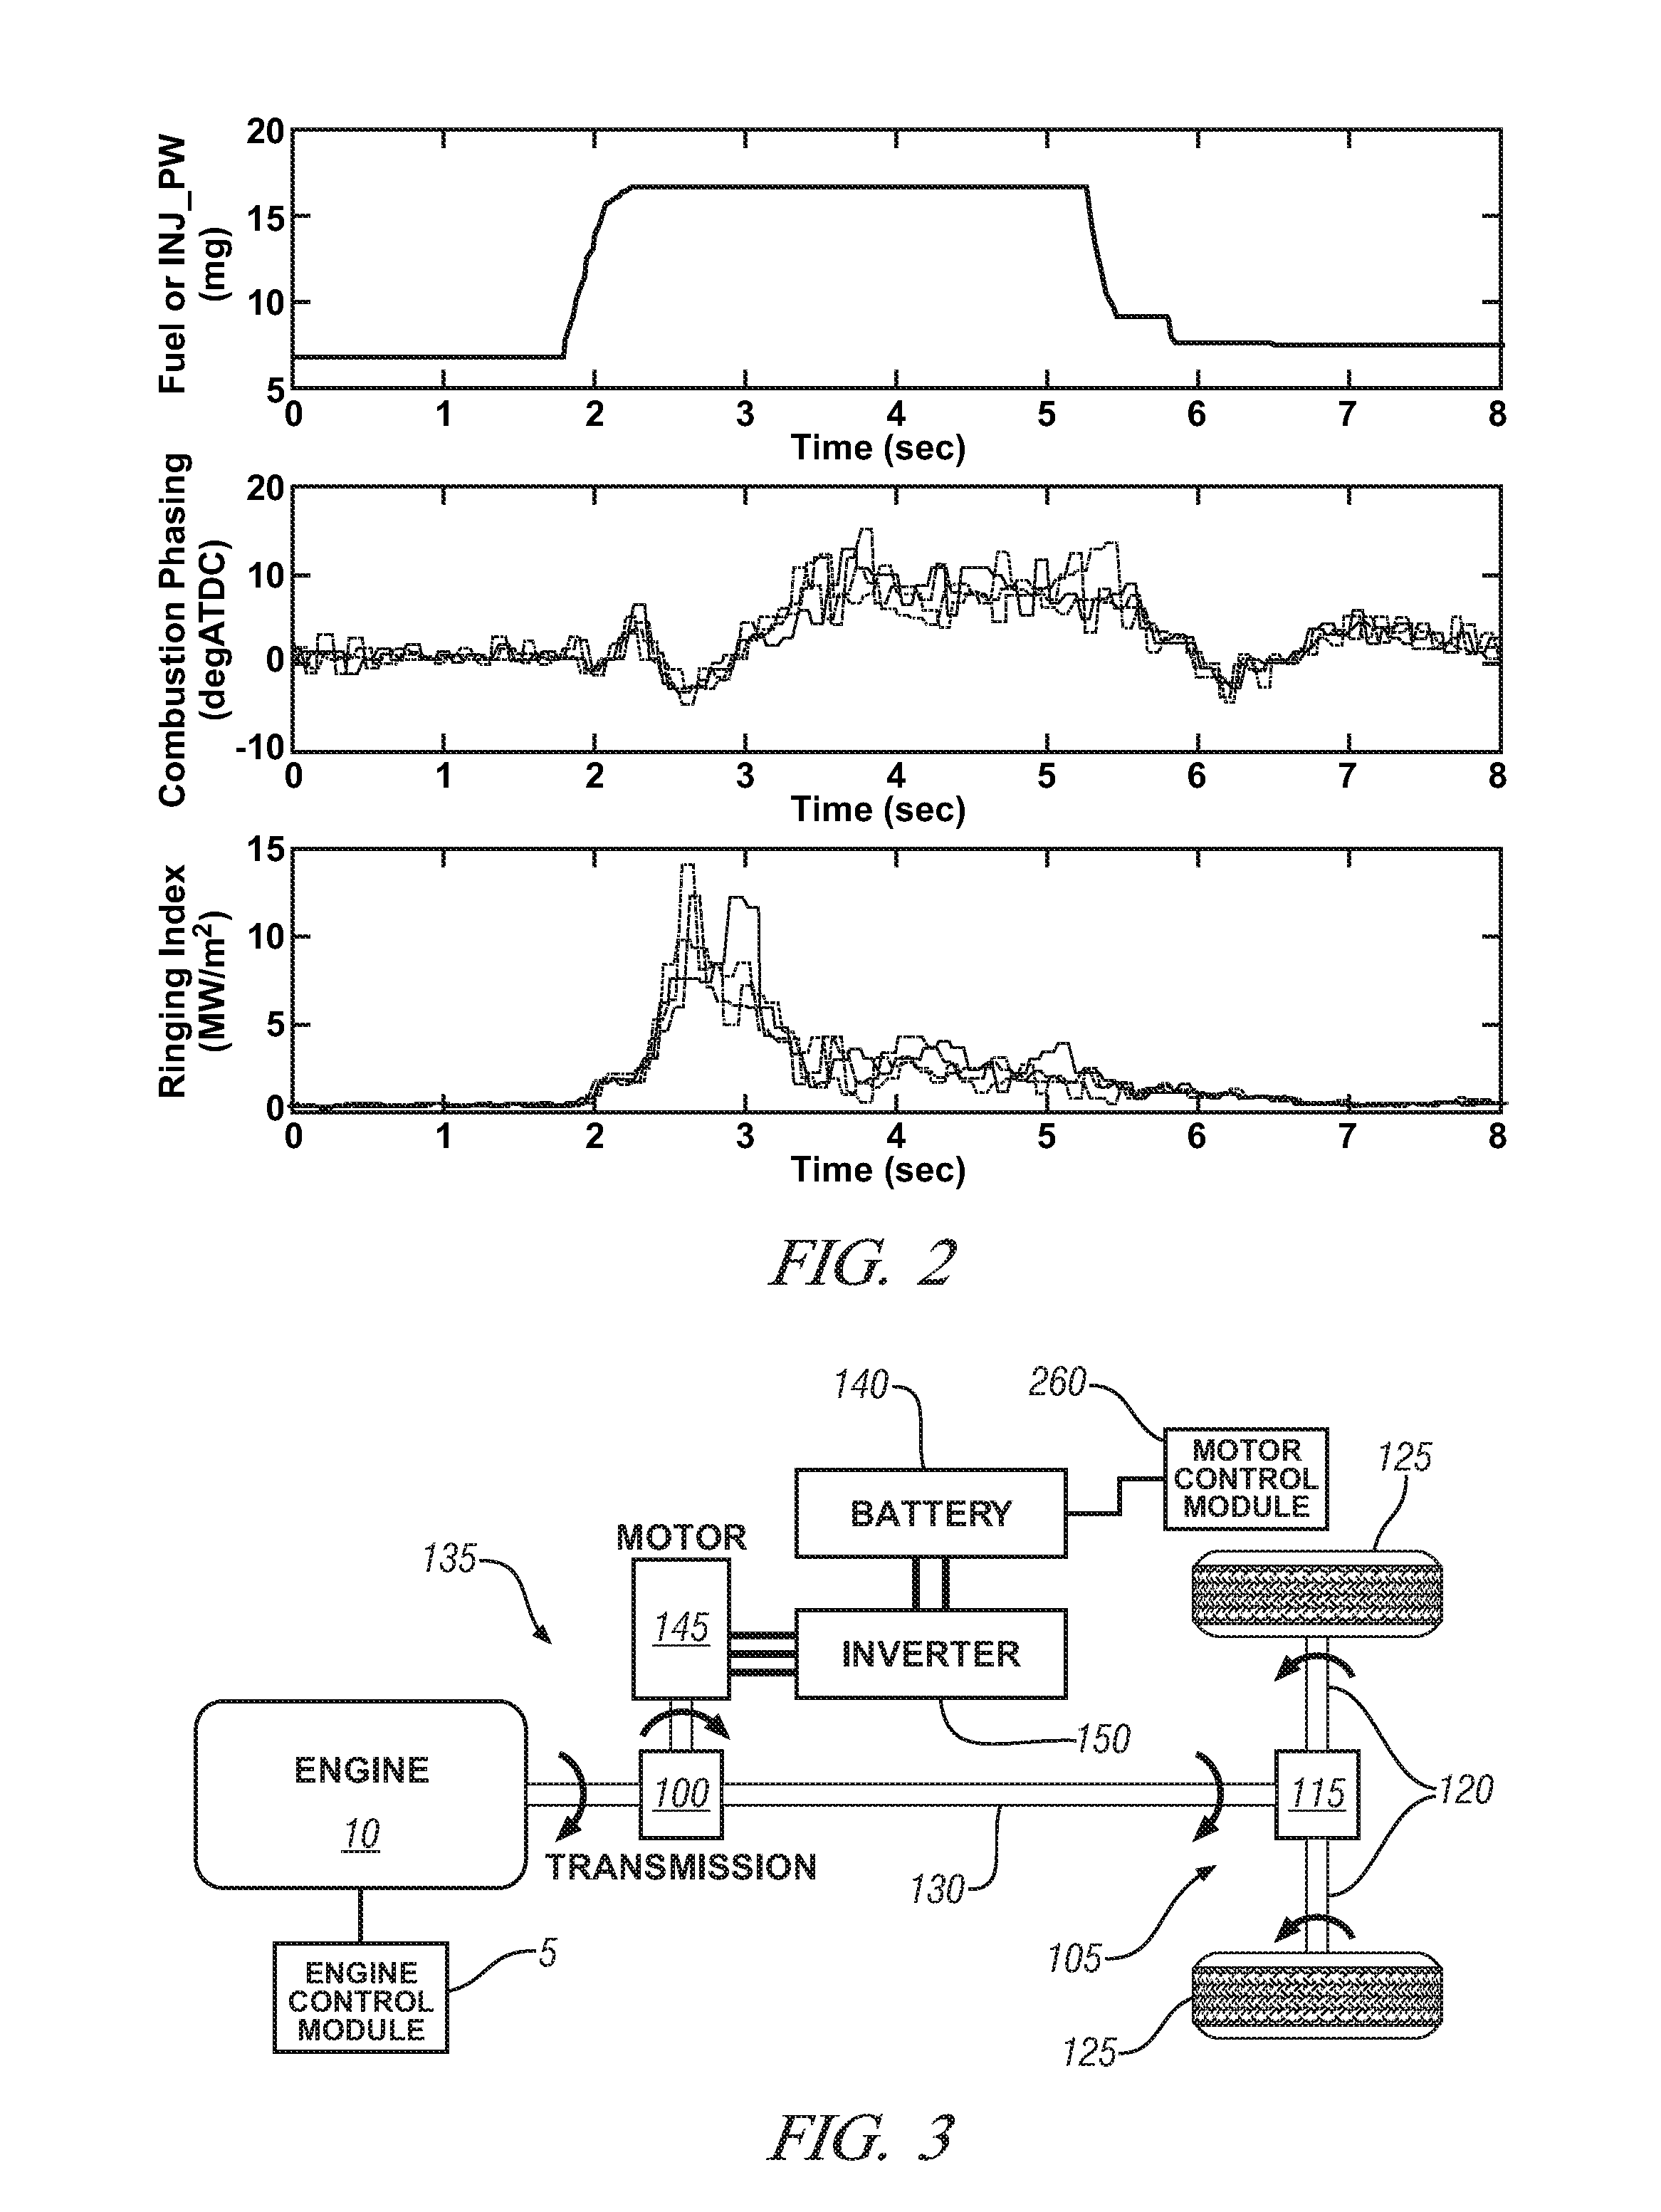 Transient combustion noise control in a hybrid powertrain including an hcci engine